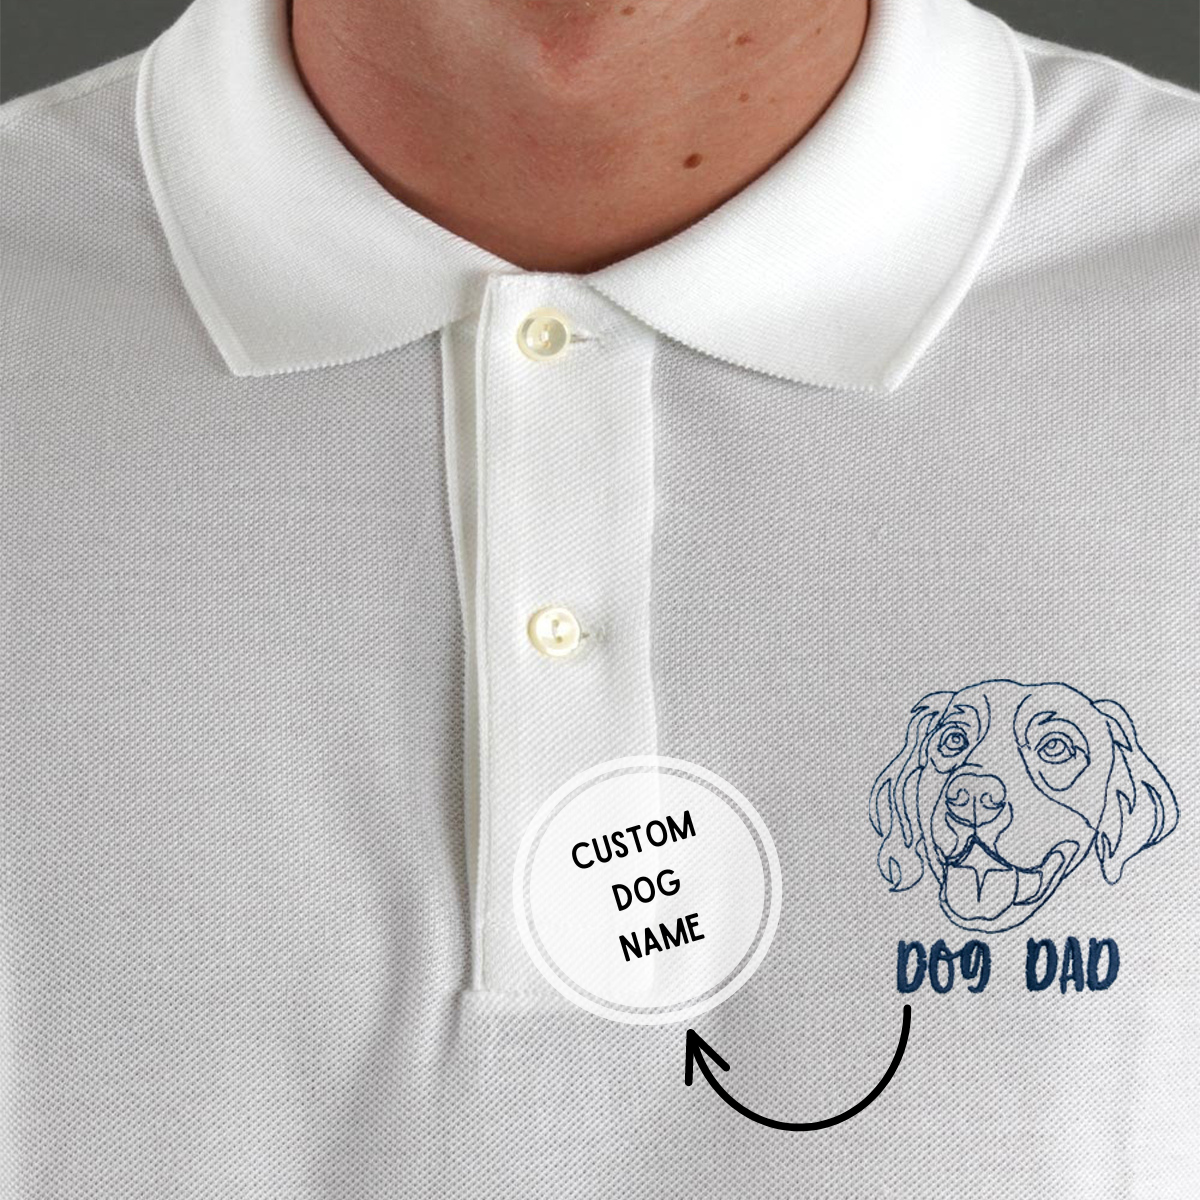 Personalized Golden Retriever Dog Dad Embroidered Polo Shirt, Custom Polo Shirt with Dog Name, Best Gifts for Golden Retriever Lovers